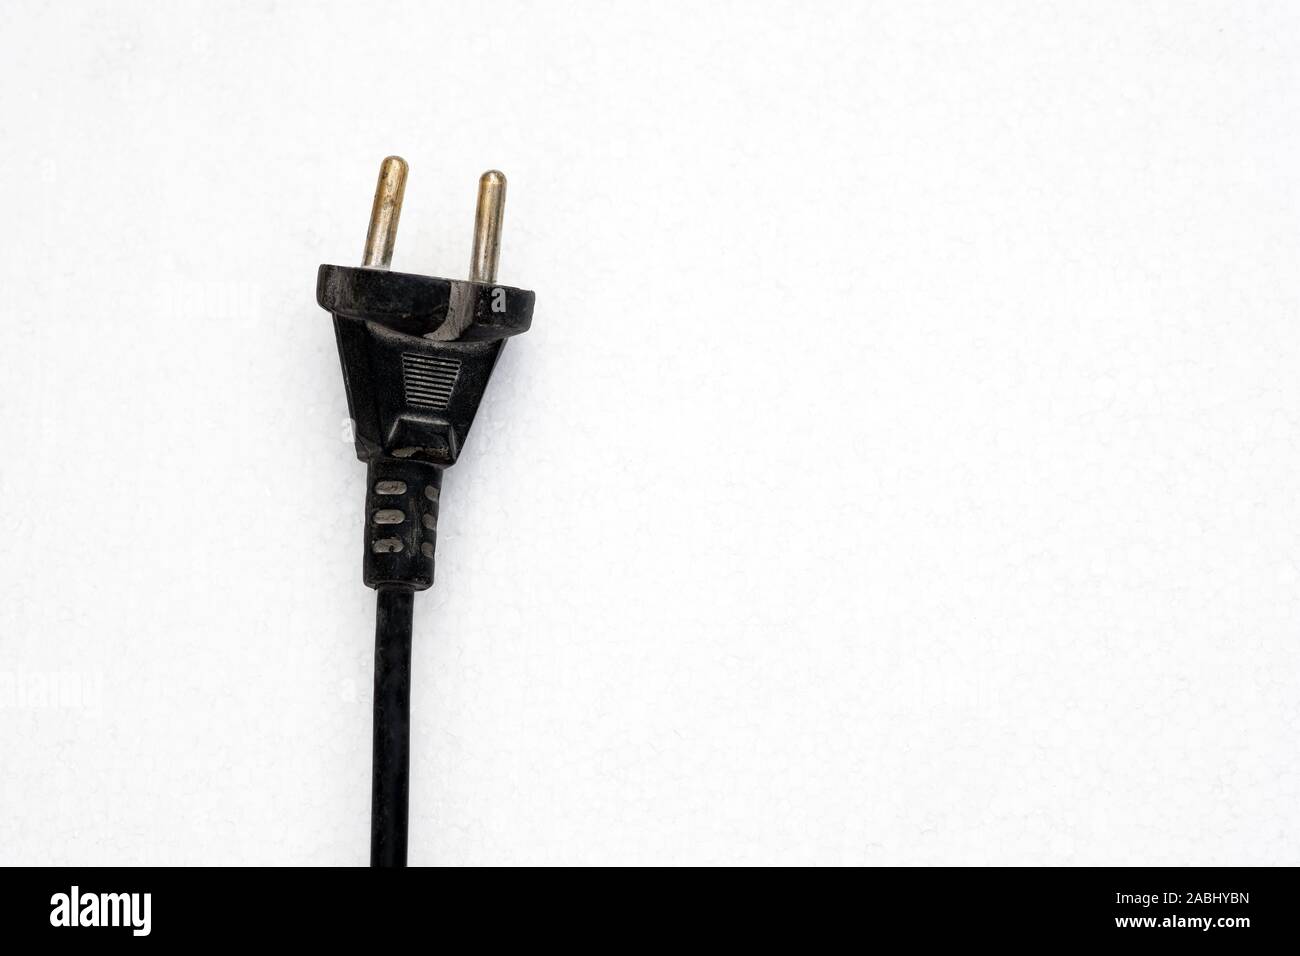 Electric plug close up. Black electric plug with wires on a white background. Old electric plug with cords. Stock Photo